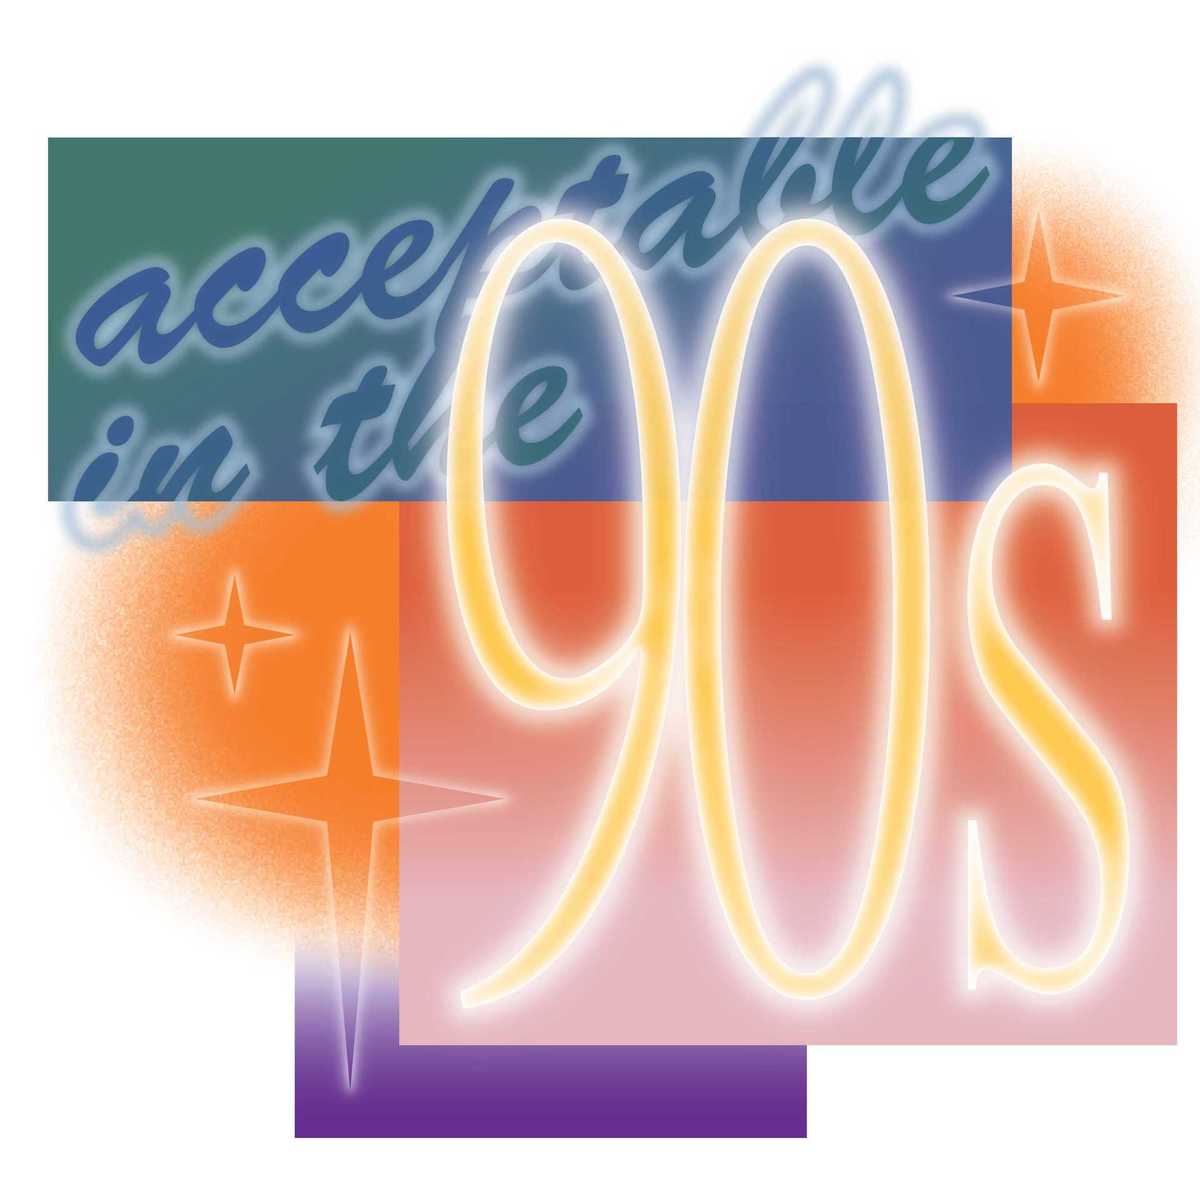 acceptable in the 90s